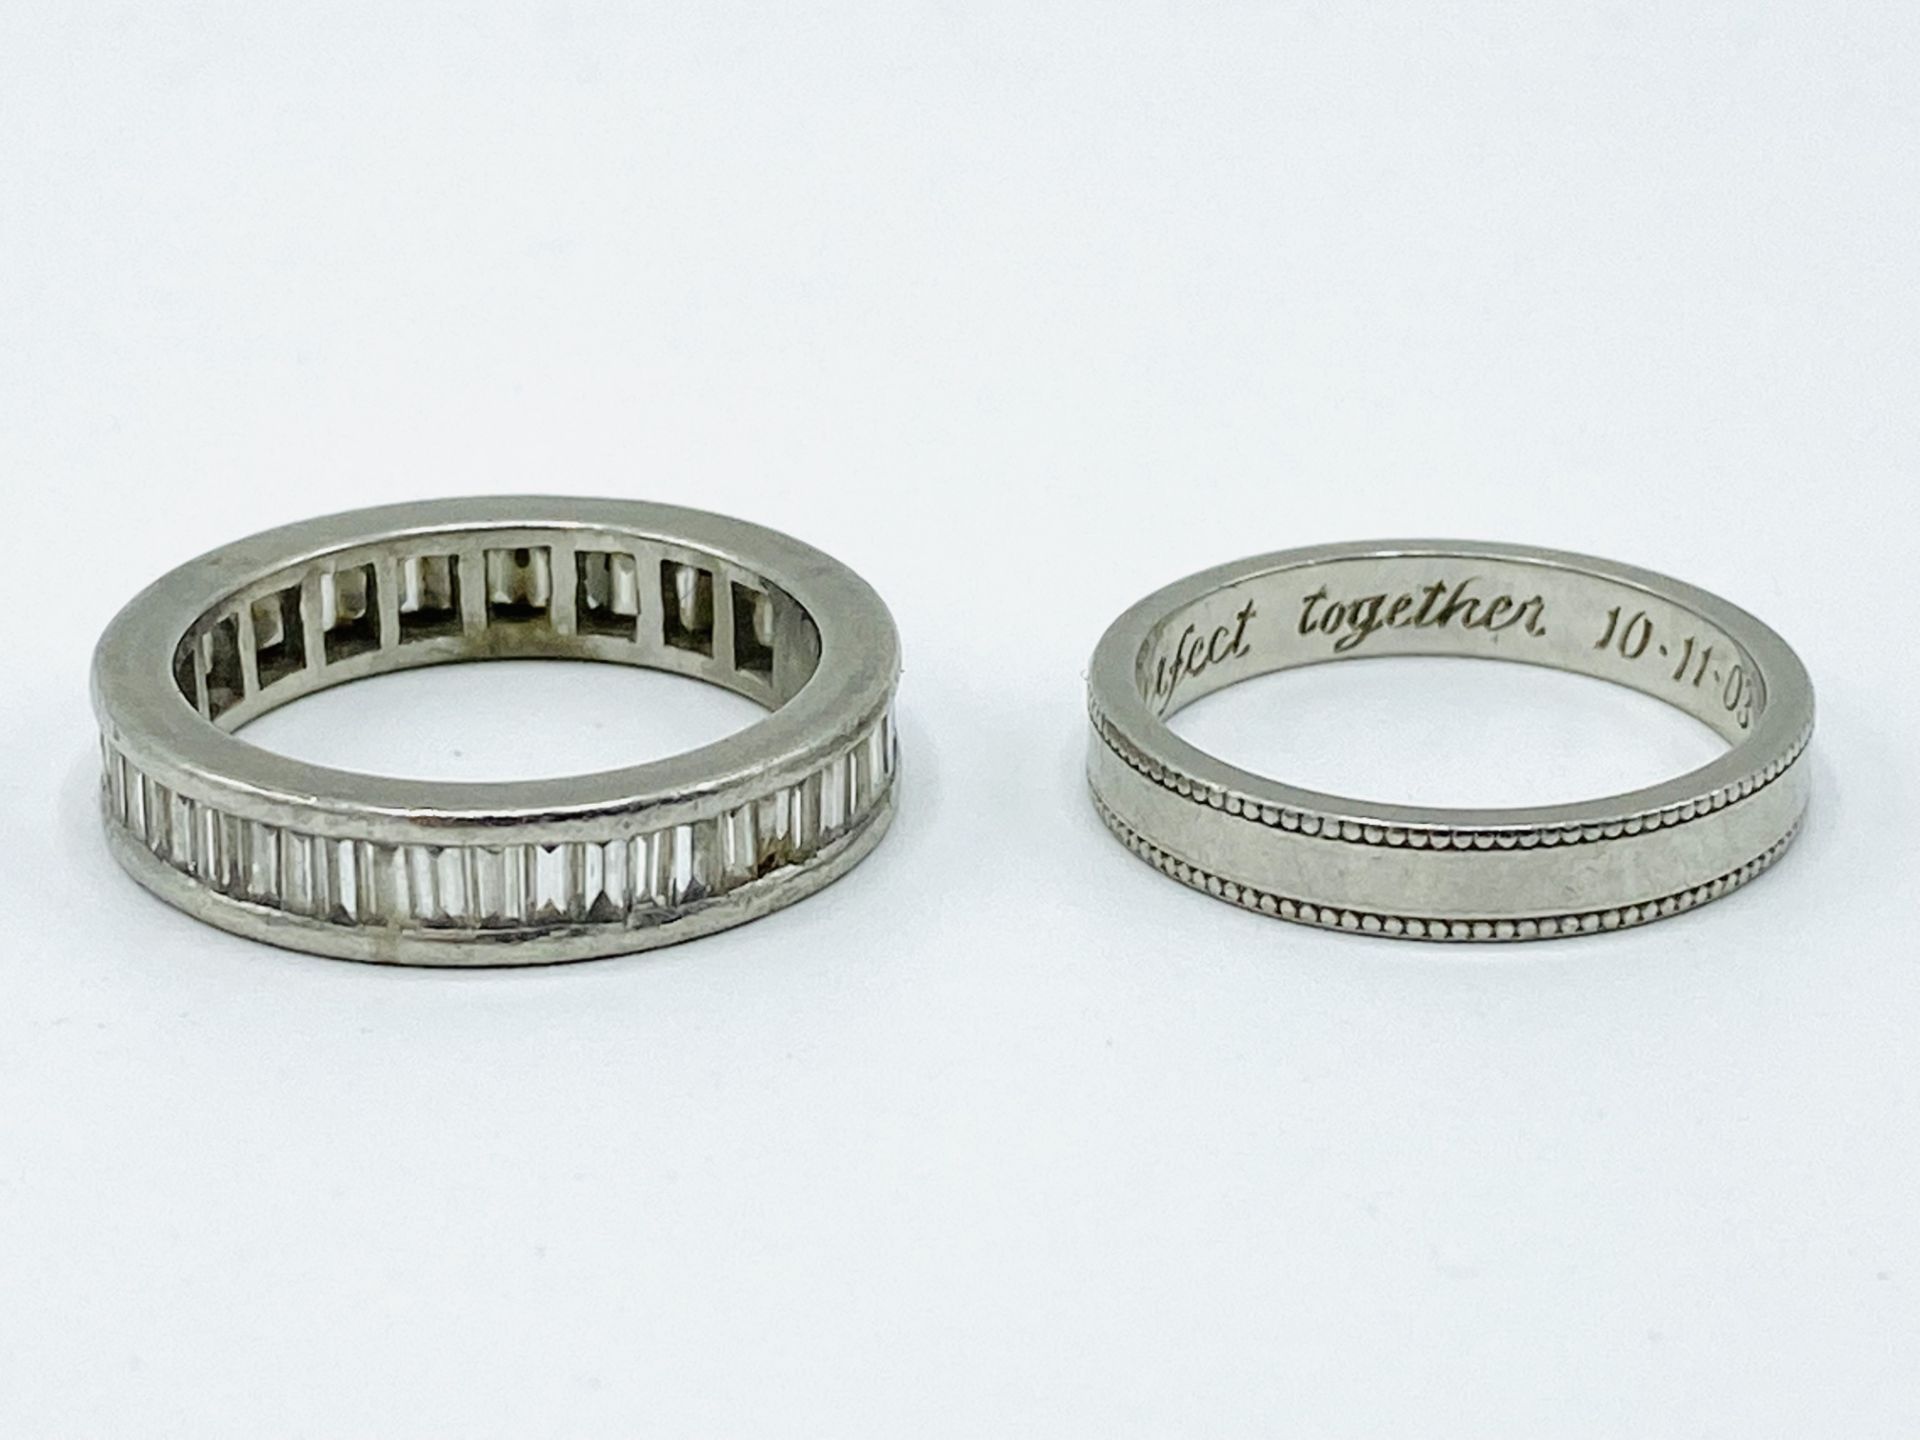 Platinum and diamond eternity ring together with a platinum band - Image 3 of 3